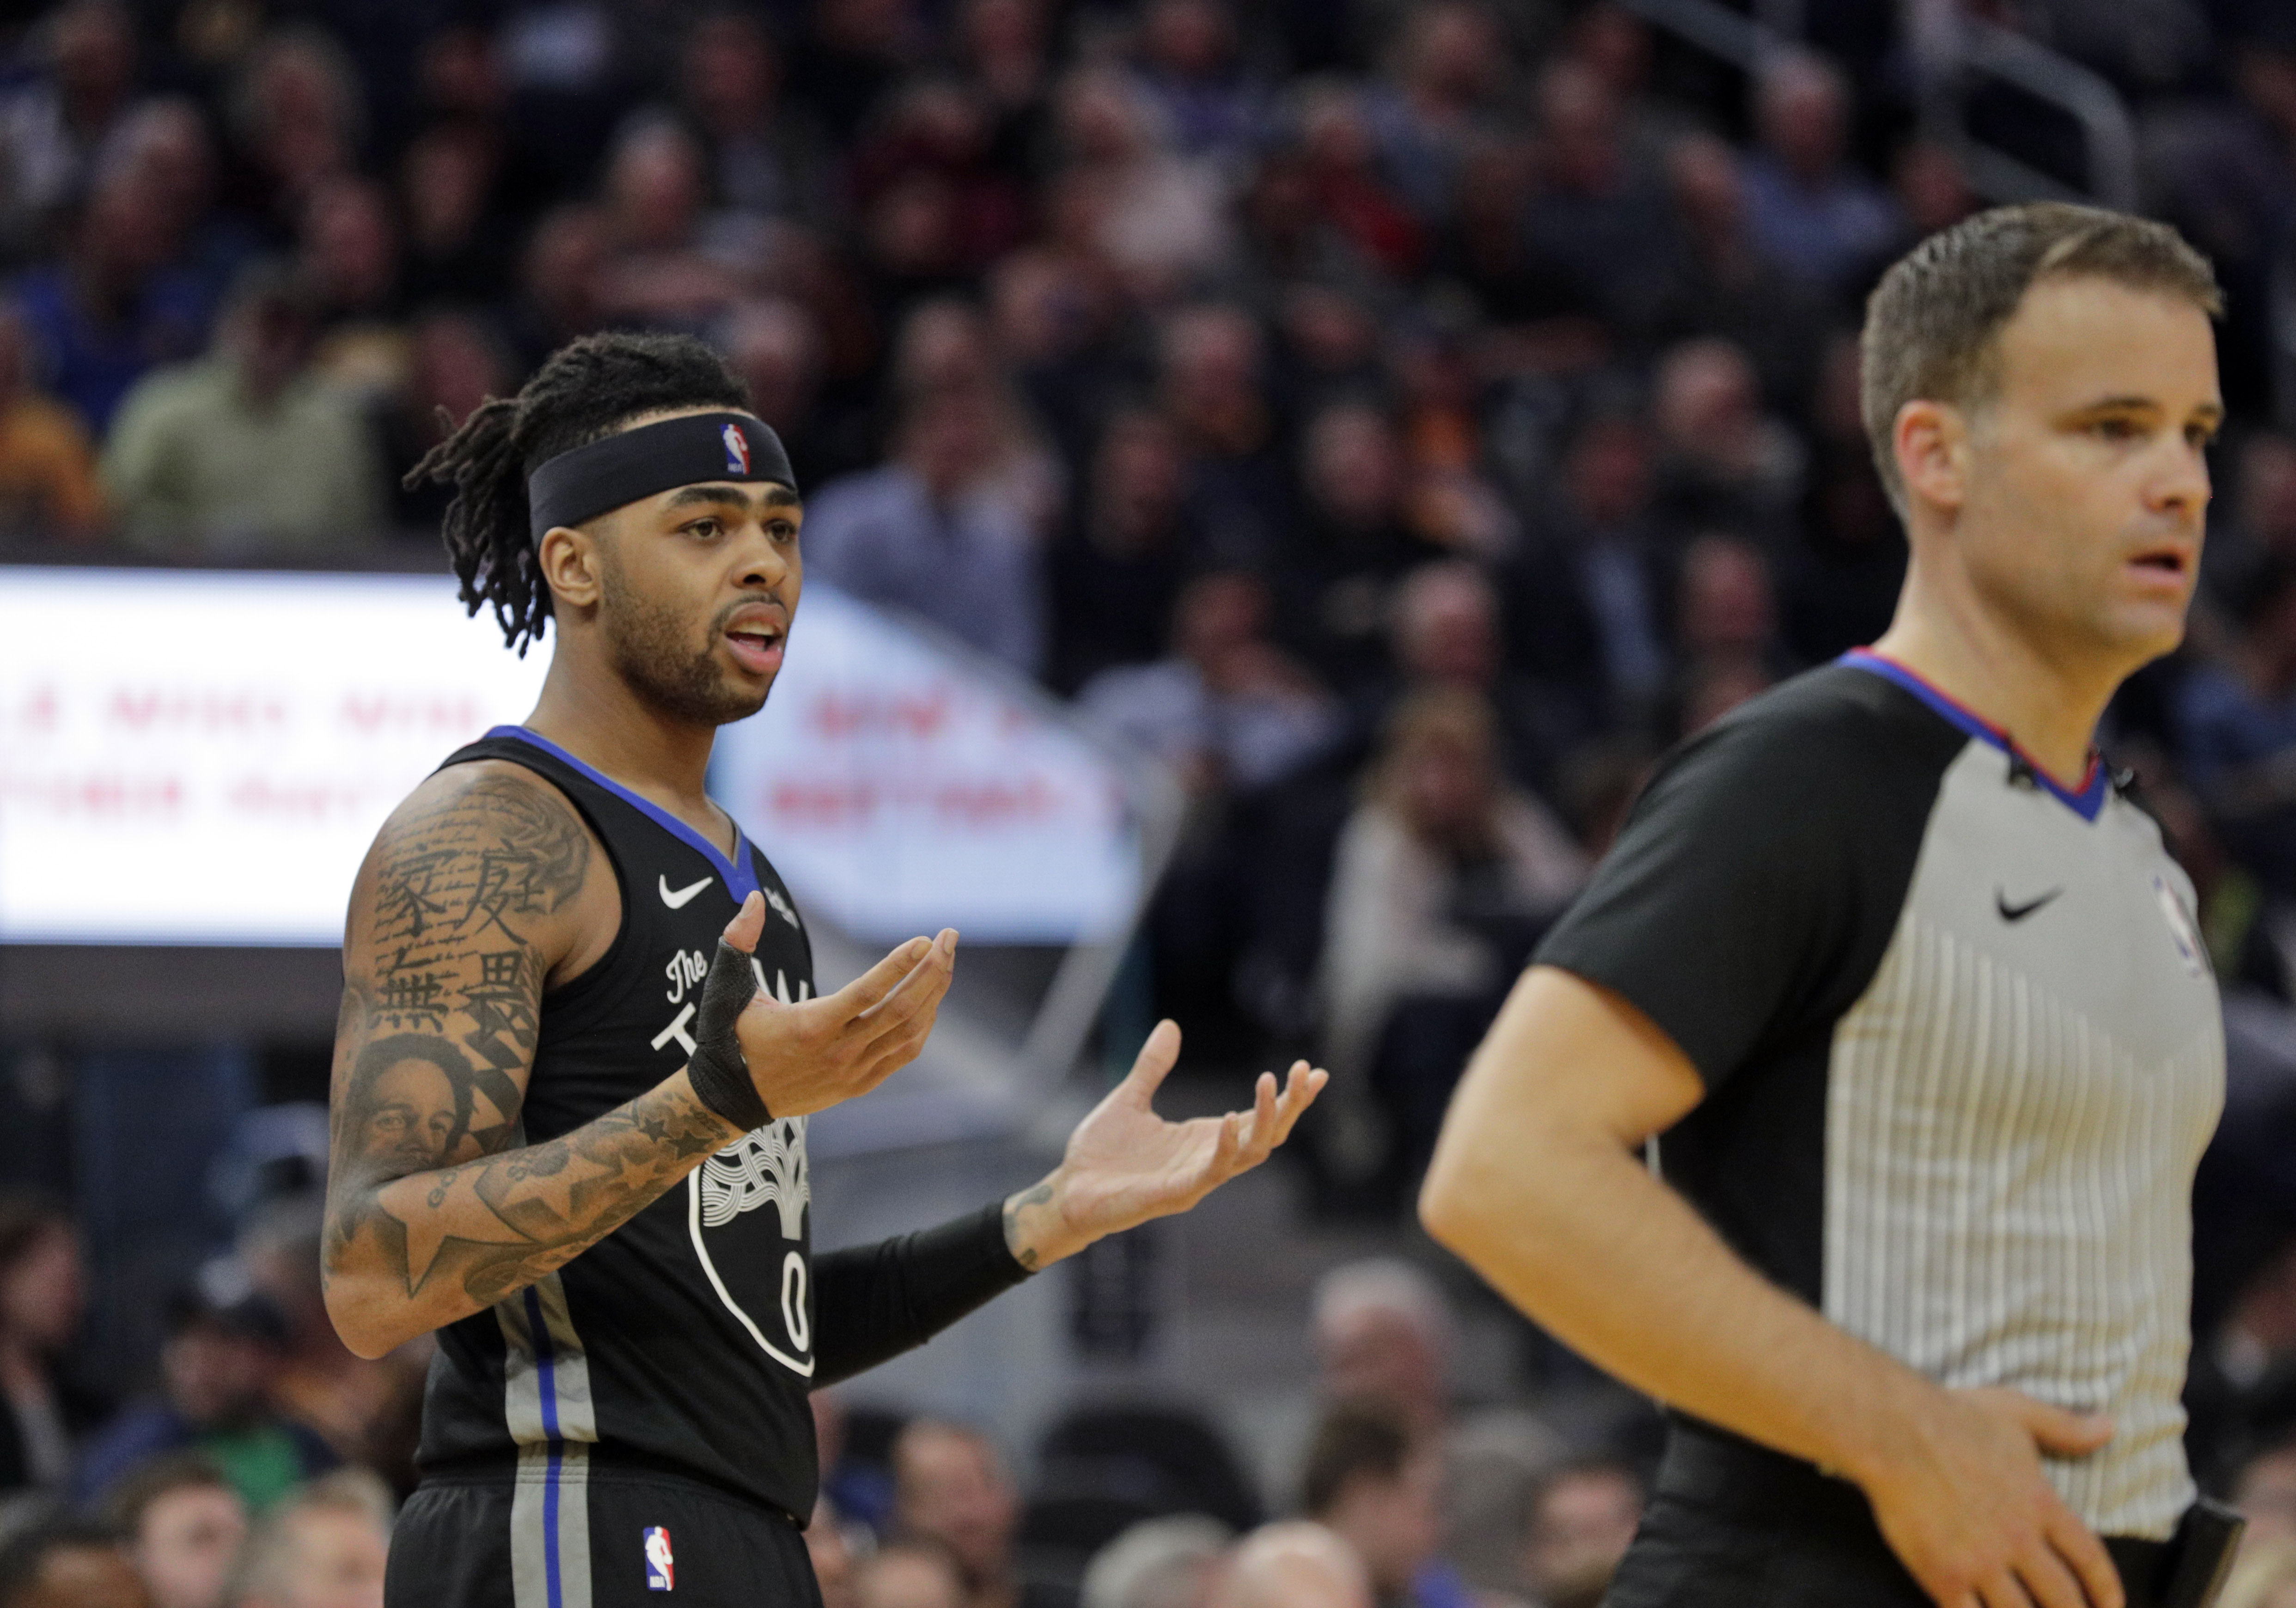 D’Angelo Russell (0) reacts to a foul call against him in the second half as the Golden State Warriors played the Dallas Mavericks at Chase Center in San Francisco, Calif., on Tuesday, January 14, 2020